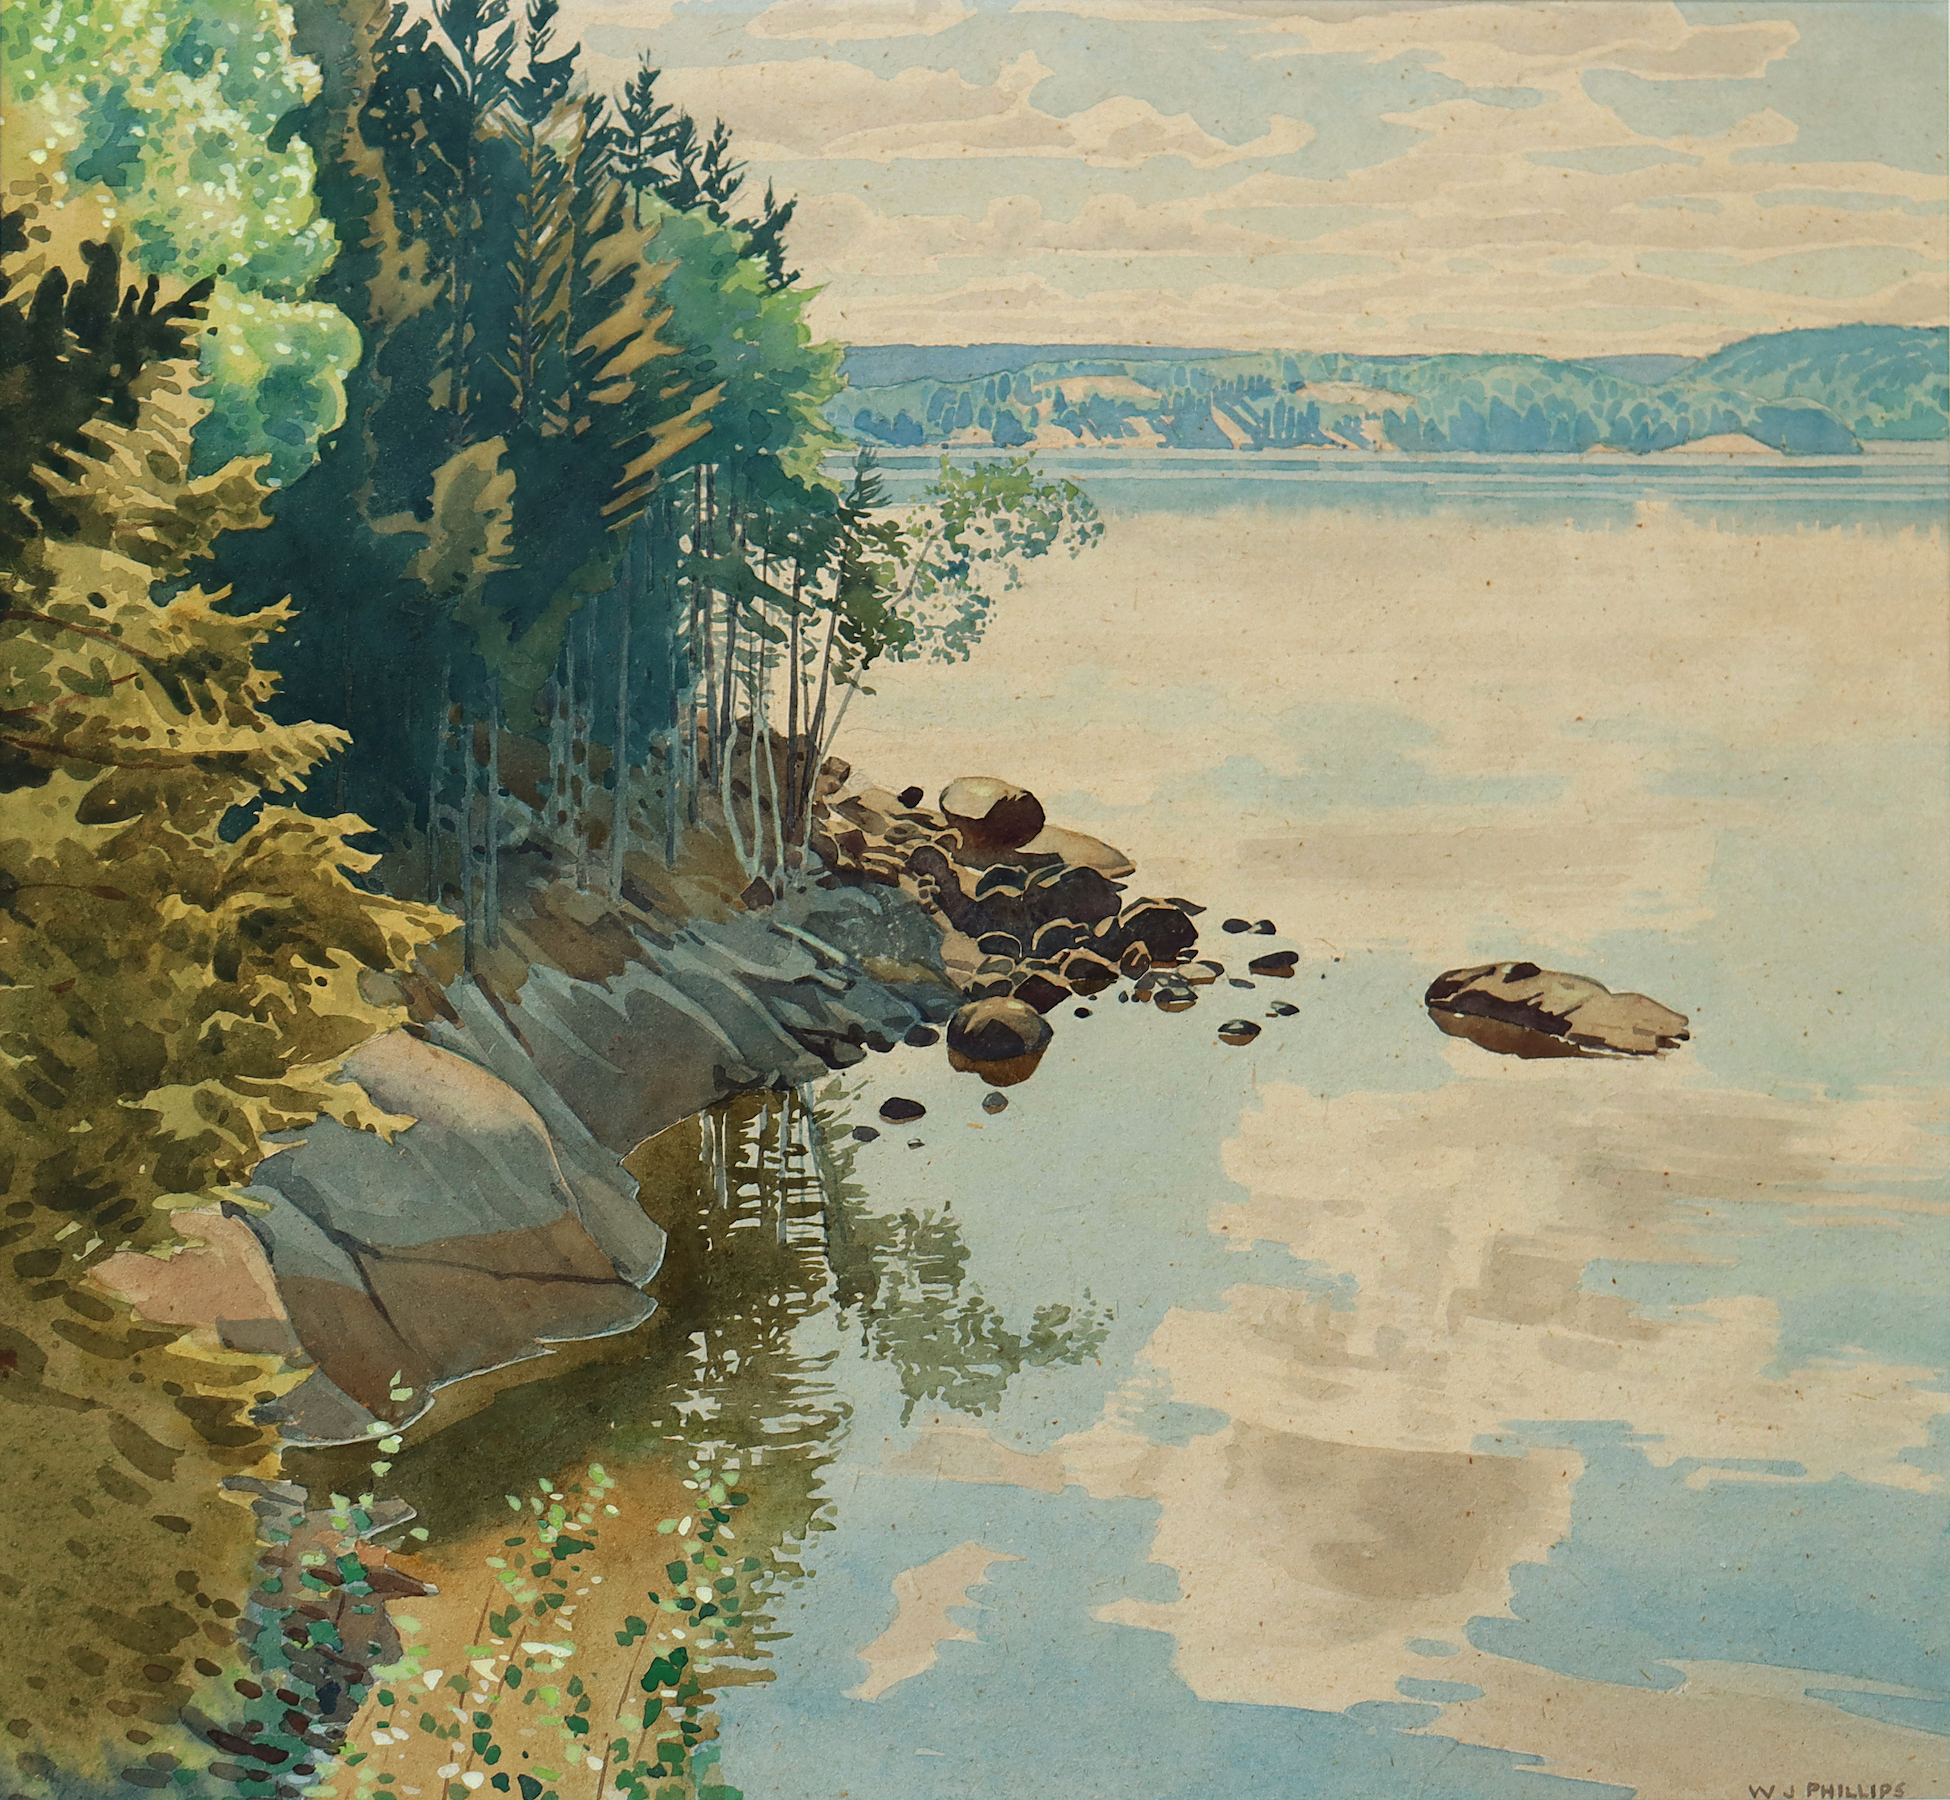 Phillips-Lake of the Woods, 1926-web